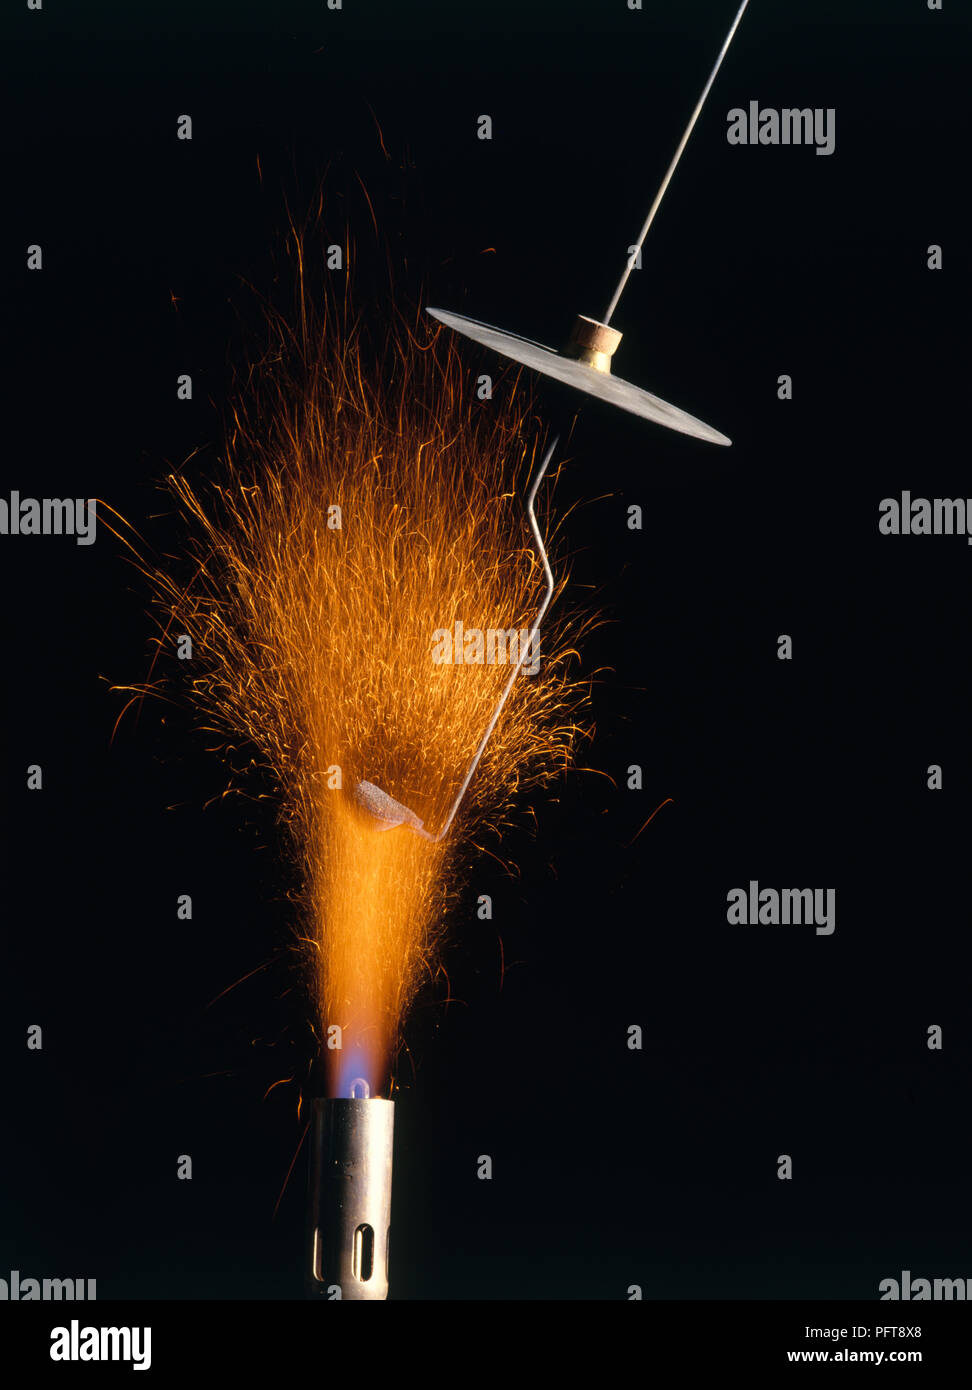 Flame experiment holding sodium chloride compound on platinum wire in Bunsen Burner flame, turning flame yellow Stock Photo